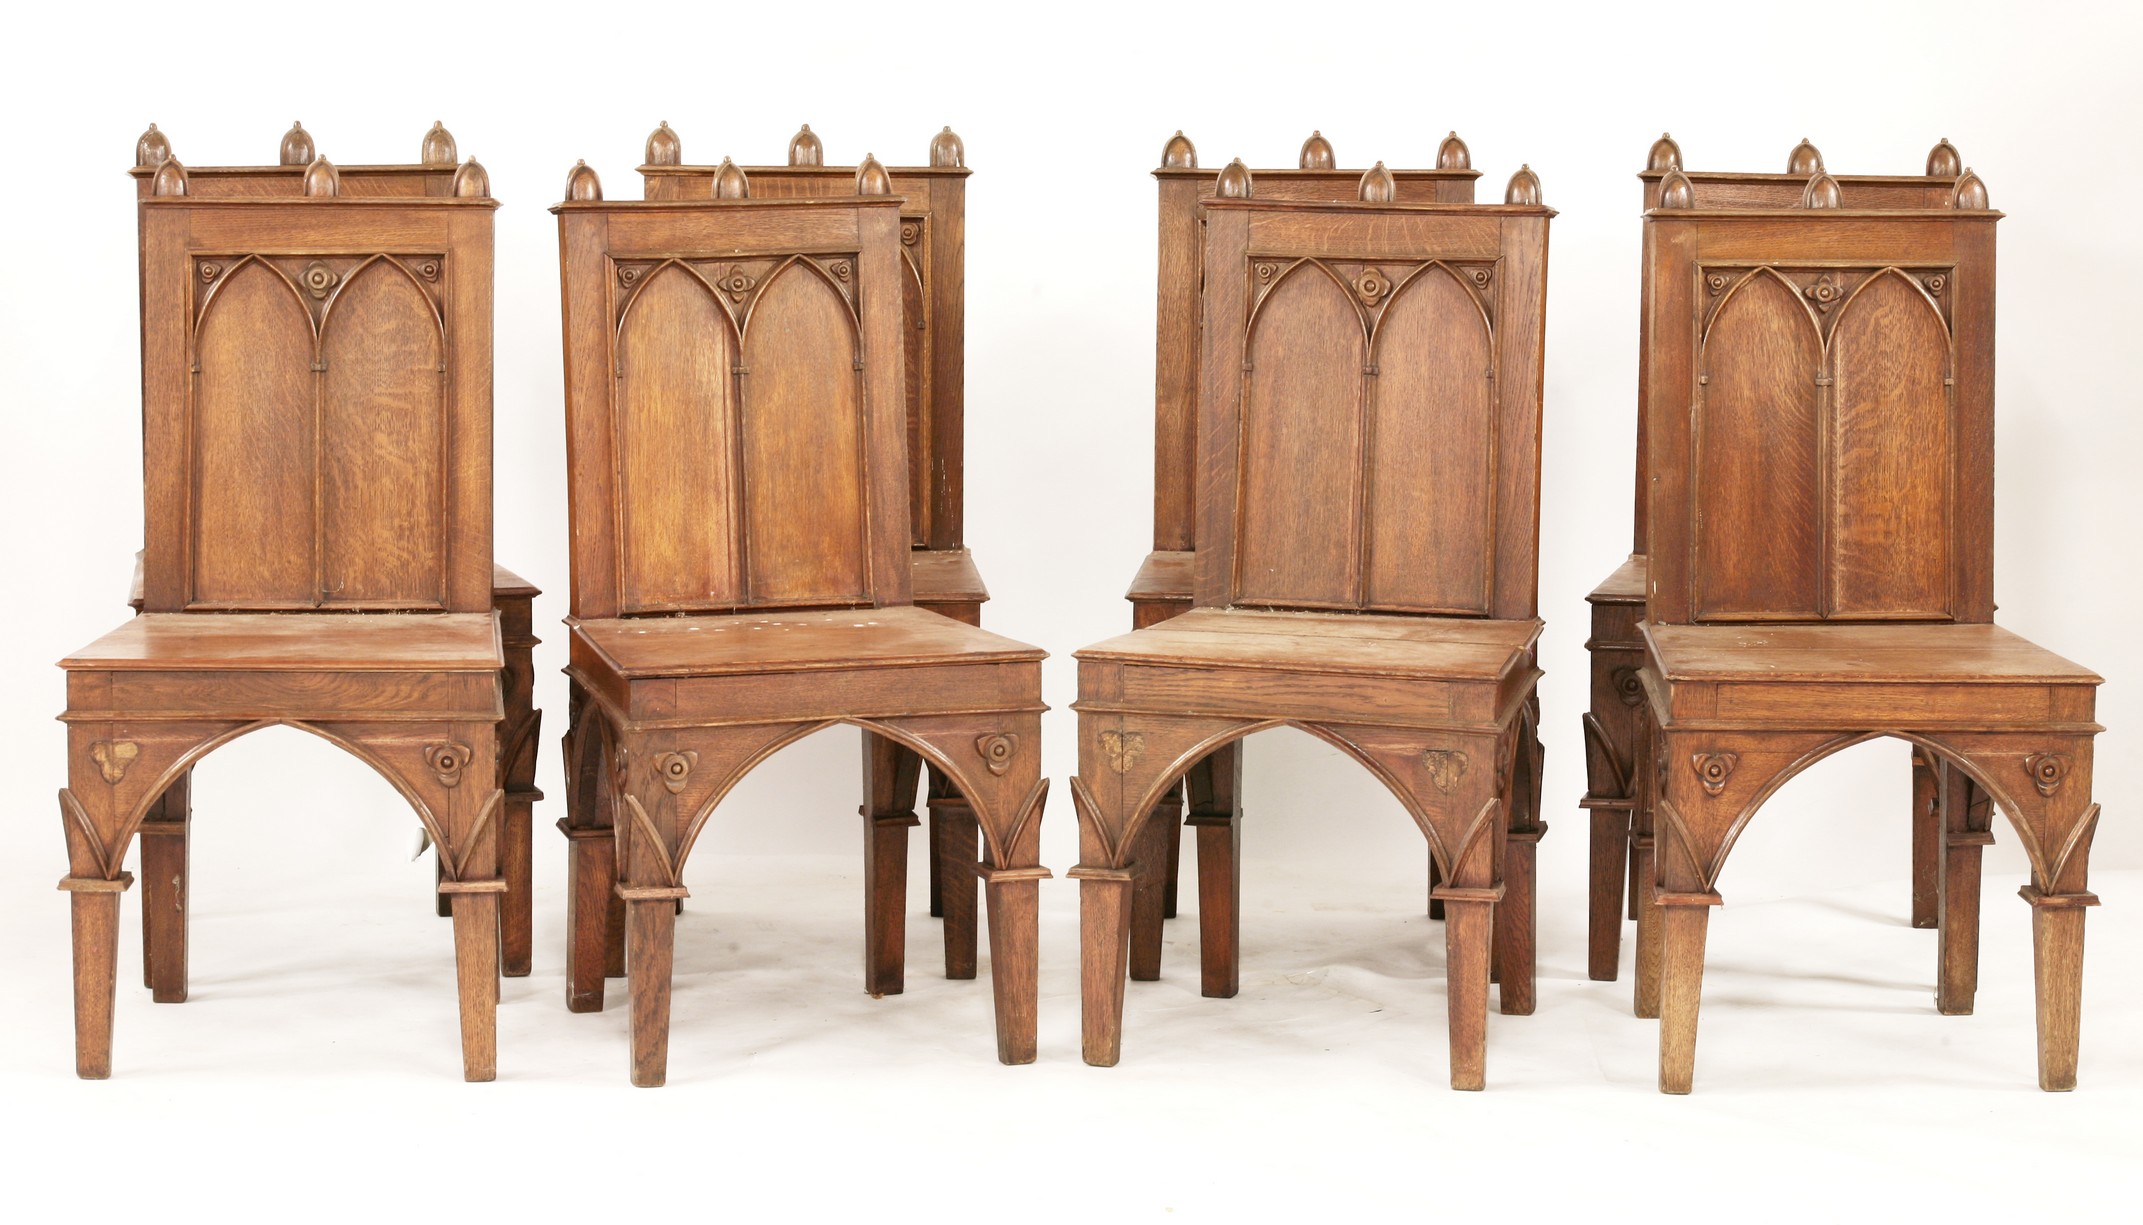 A set of ten Victorian oak hall chairs,
with blind tracery arcaded backs and triple acorn-shaped